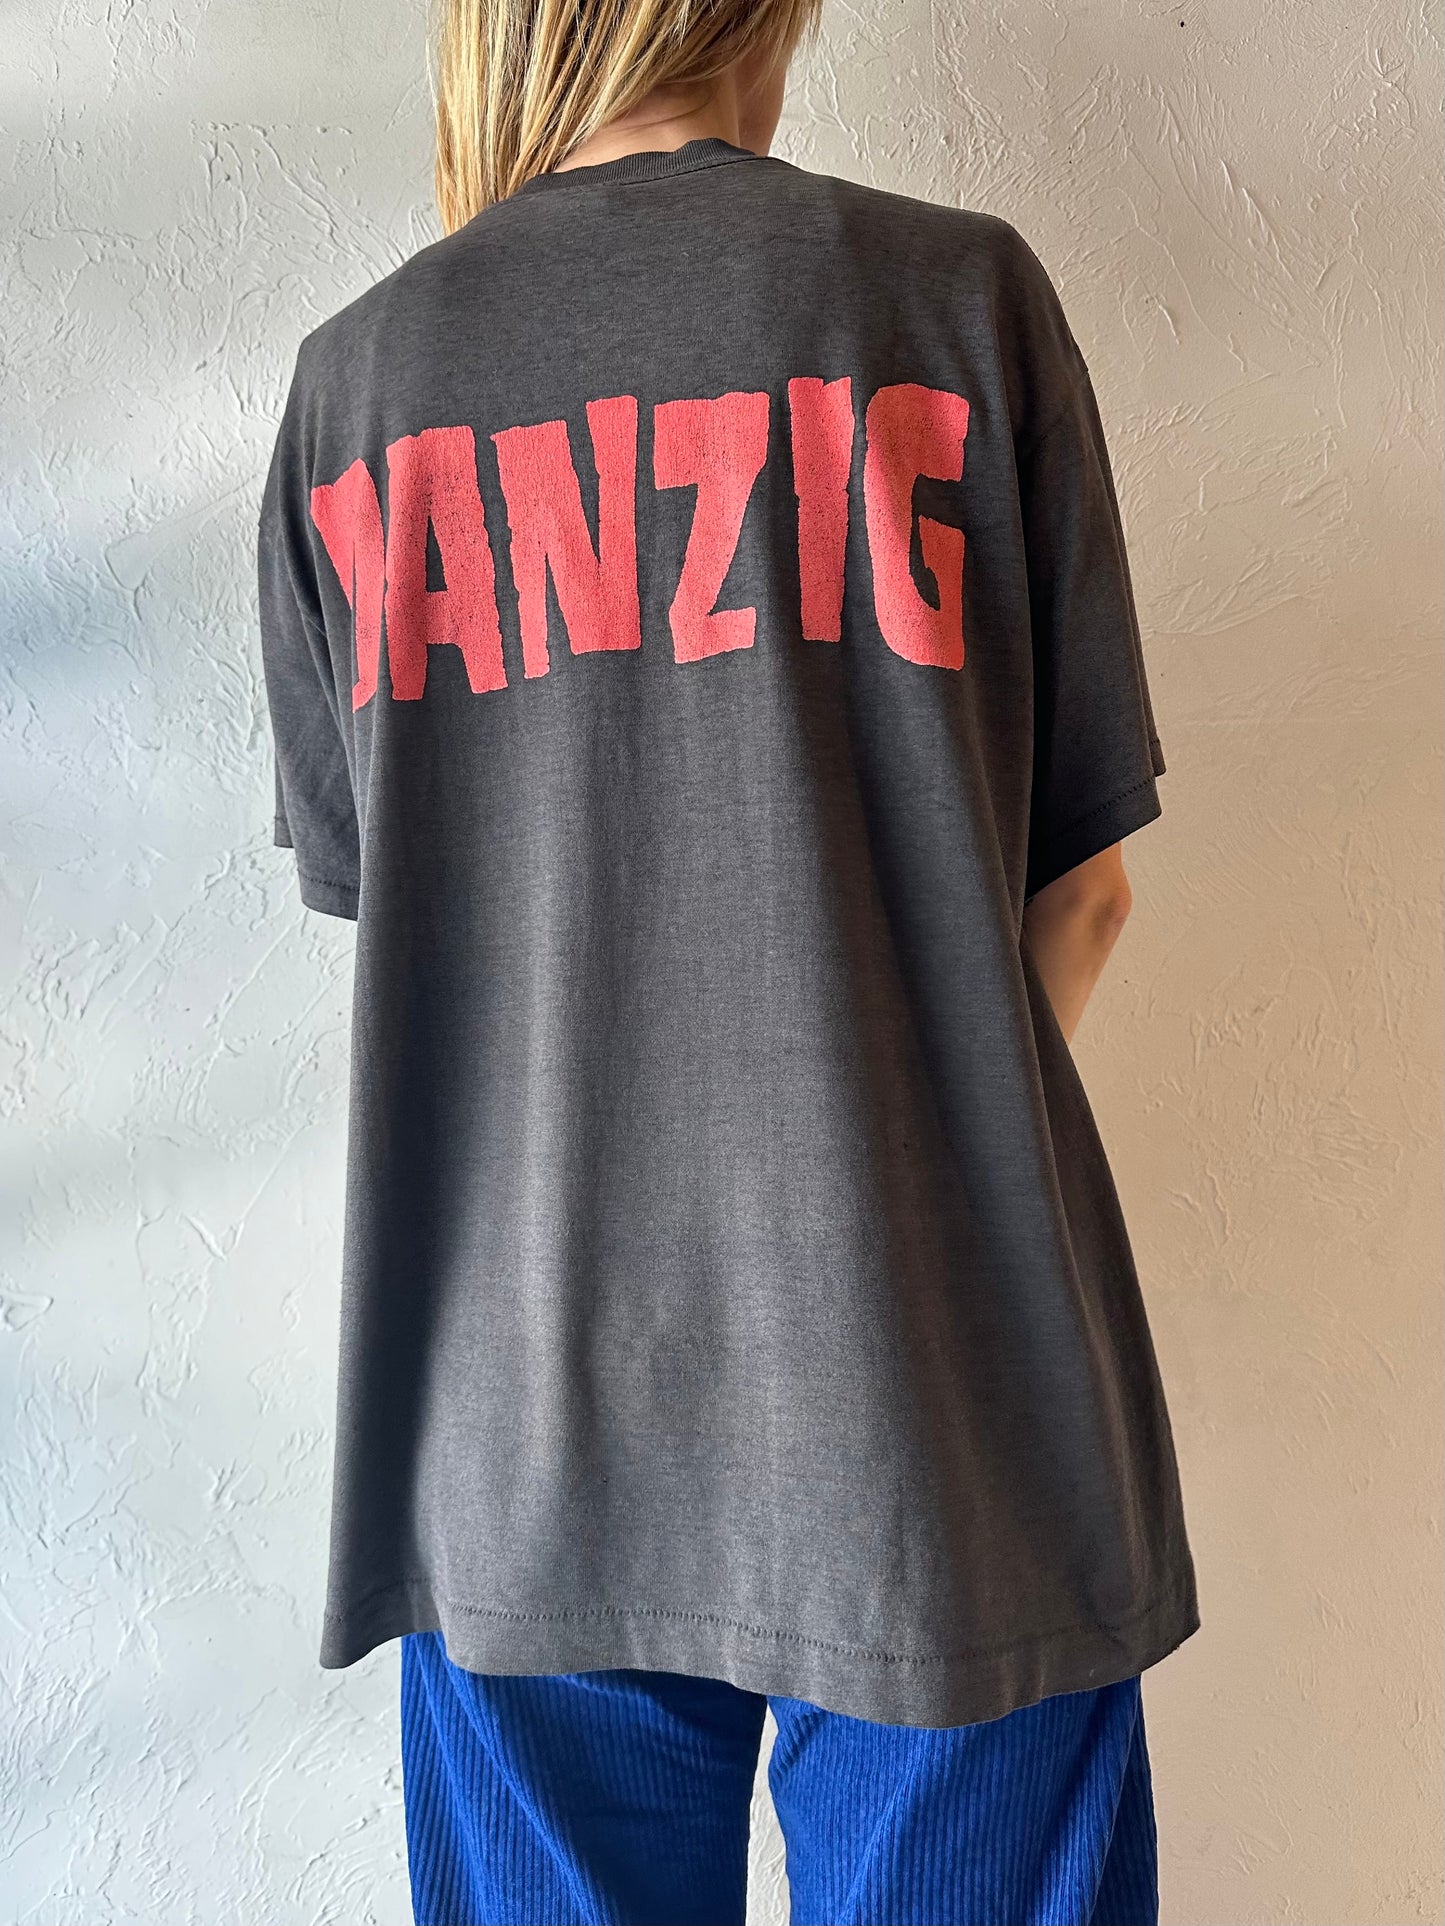 Vintage 'Danzig' Face T Shirt / Single Stitch / Made in USA / XL